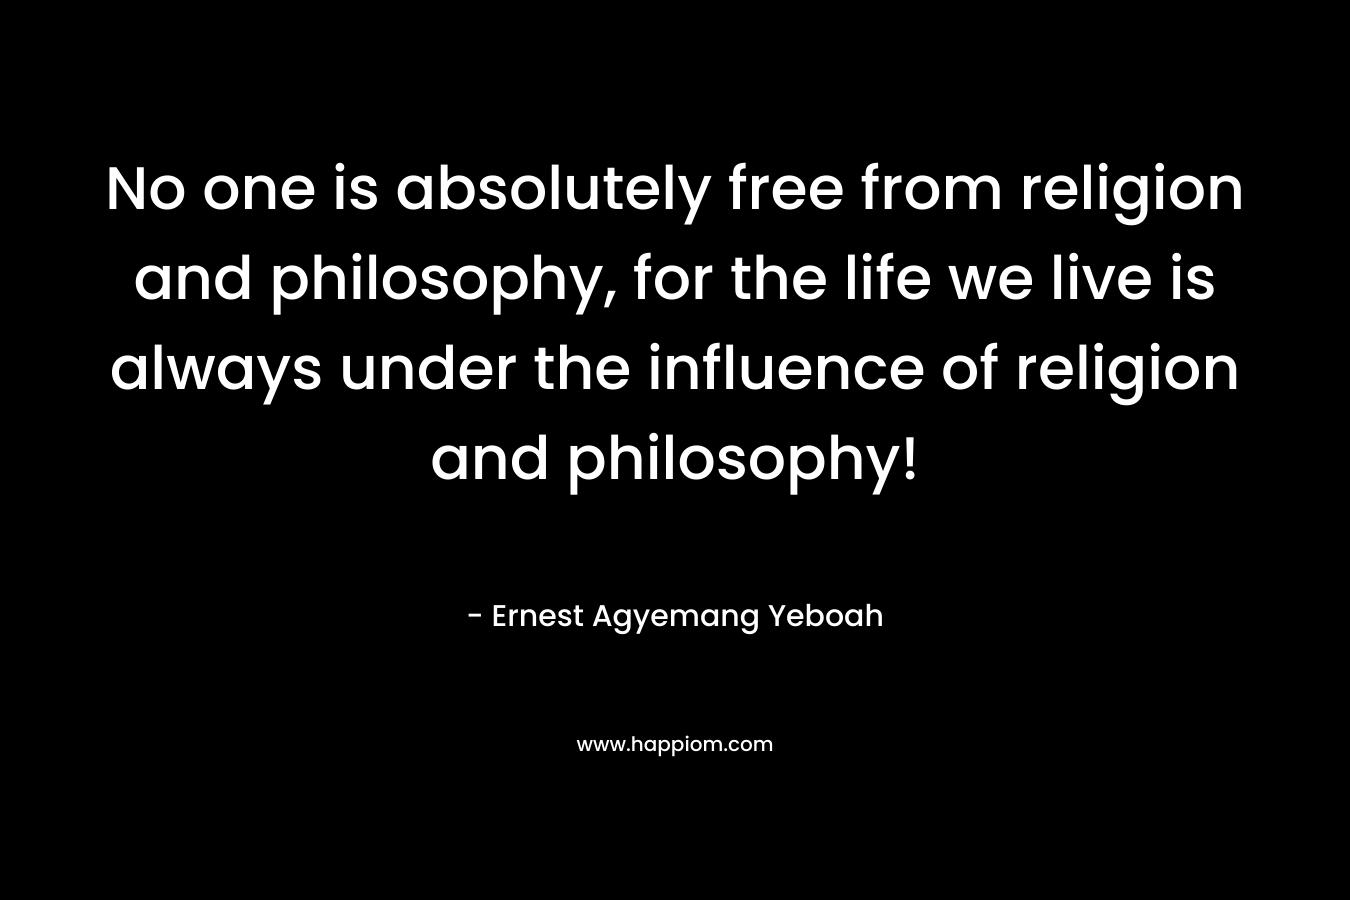 No one is absolutely free from religion and philosophy, for the life we live is always under the influence of religion and philosophy!